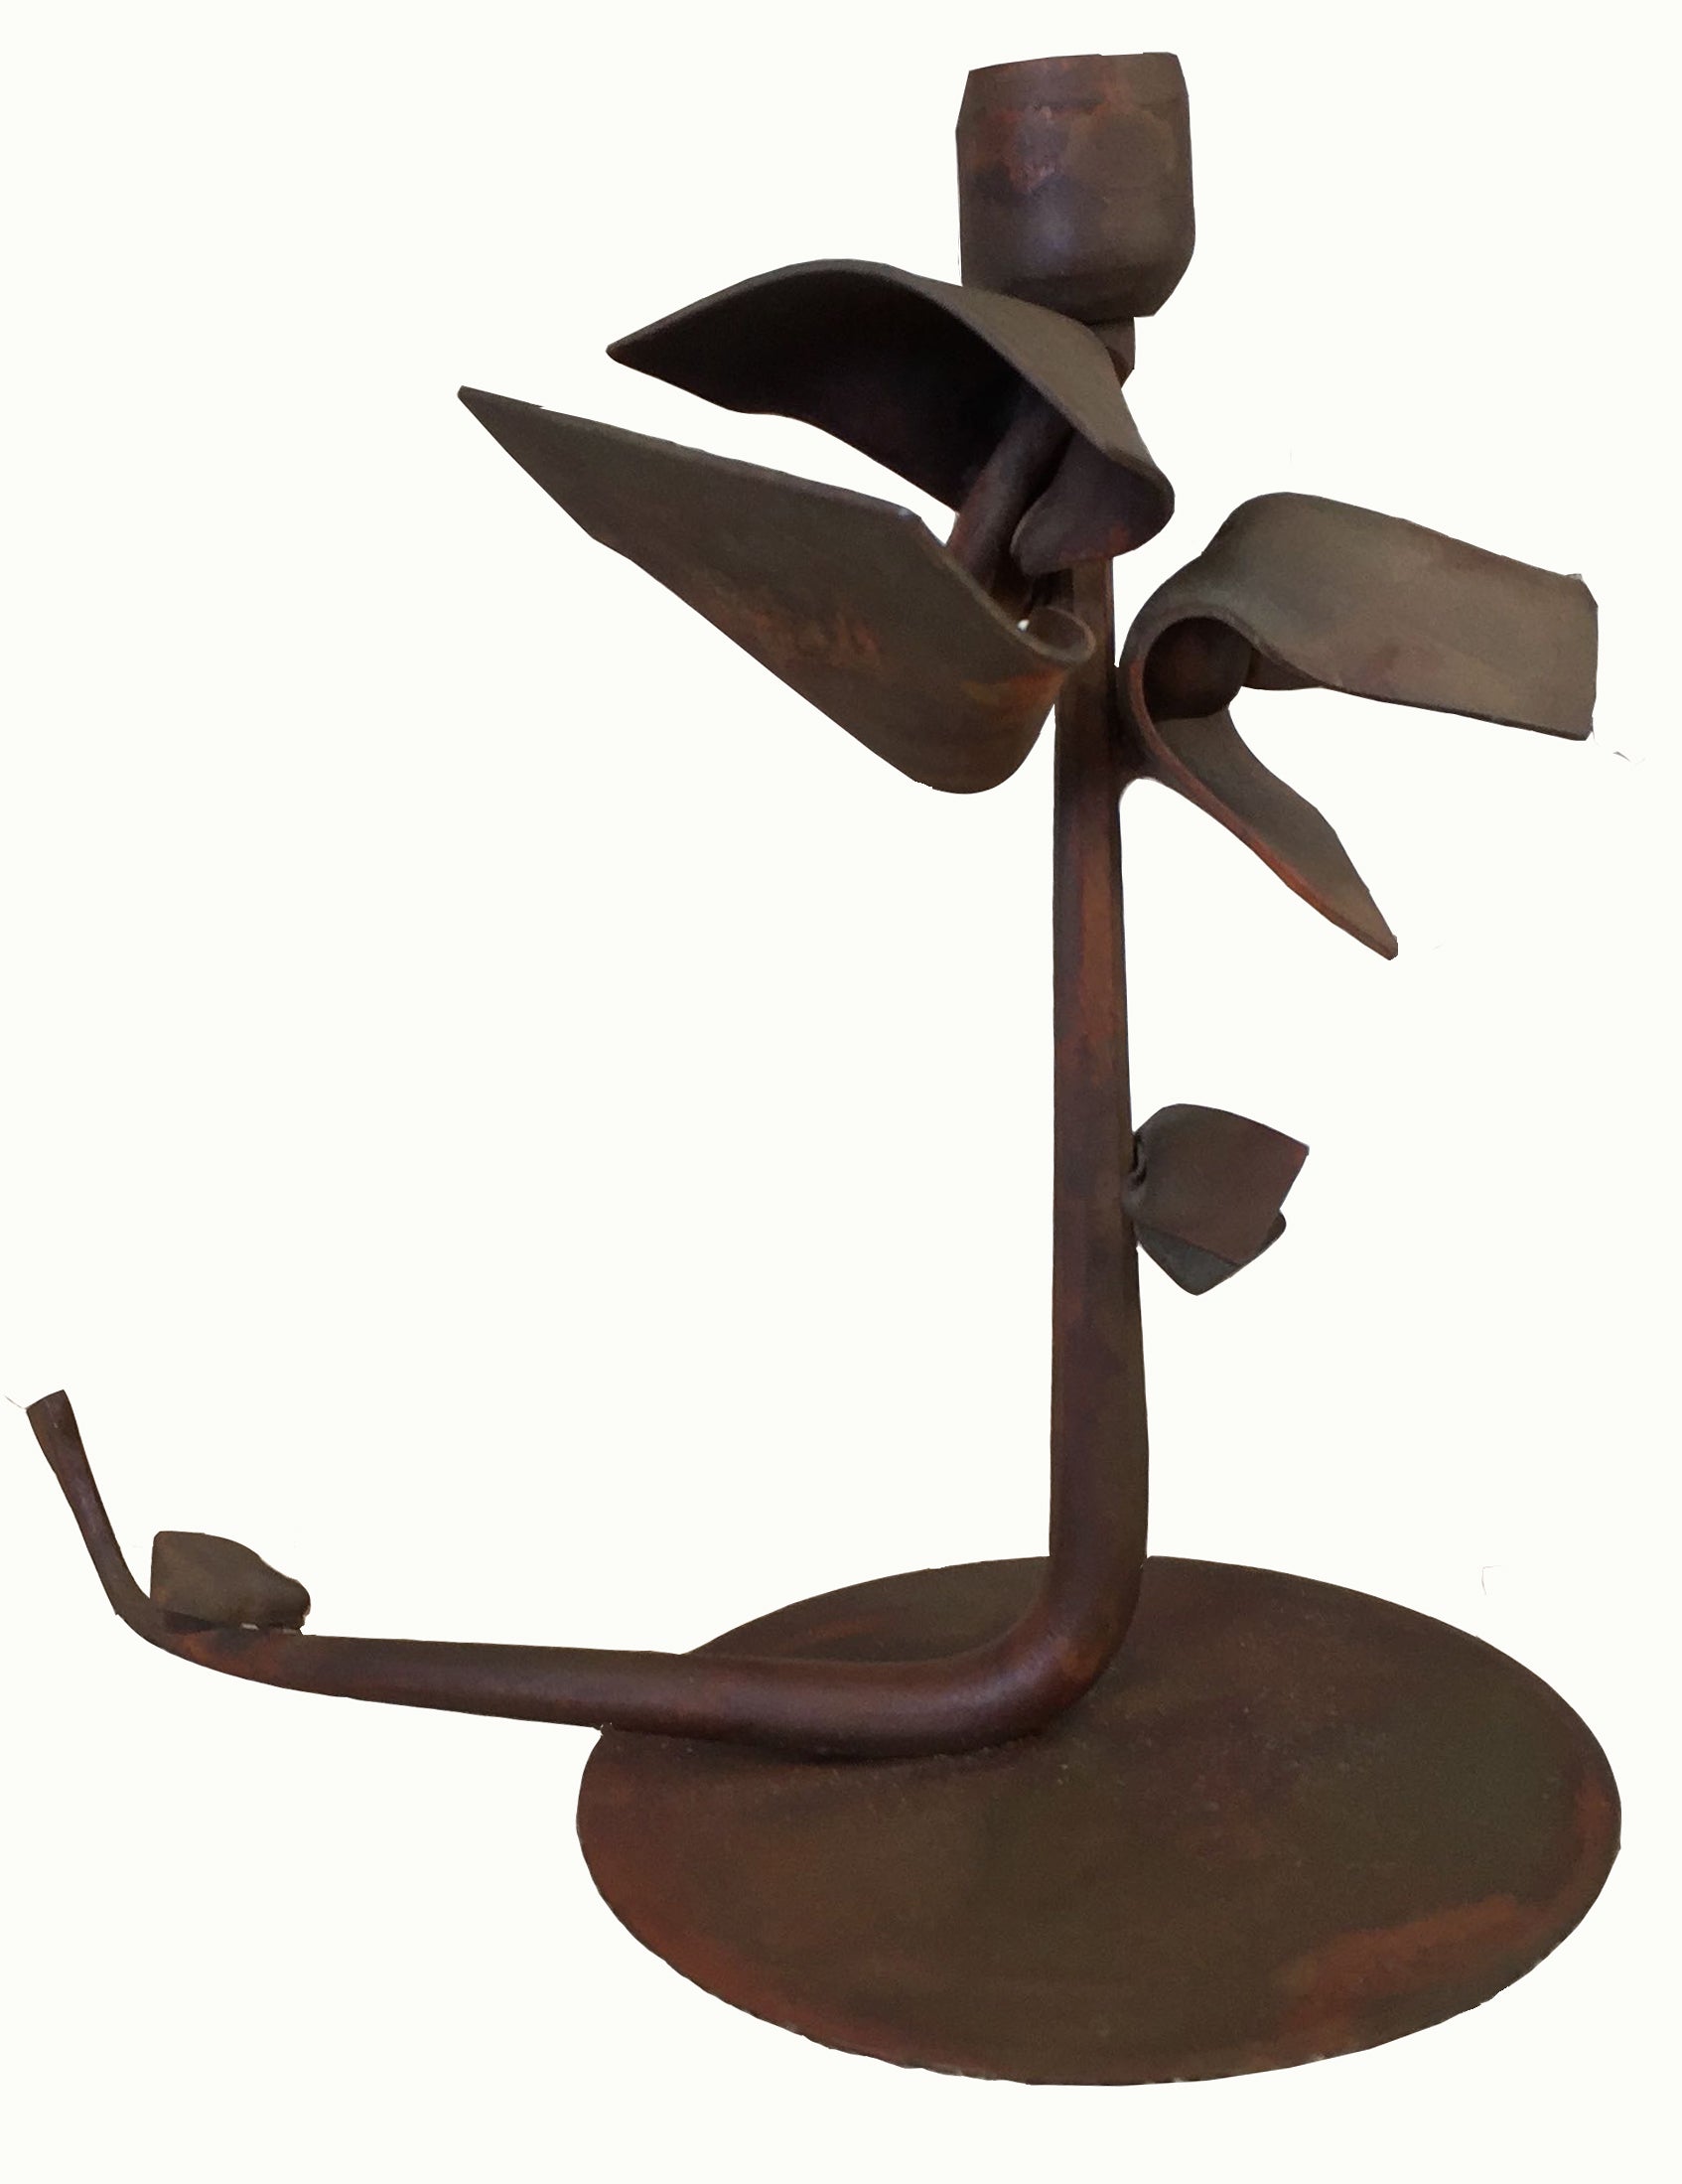 SOLD Albert Paley Forged Iron Floral Candlestick,